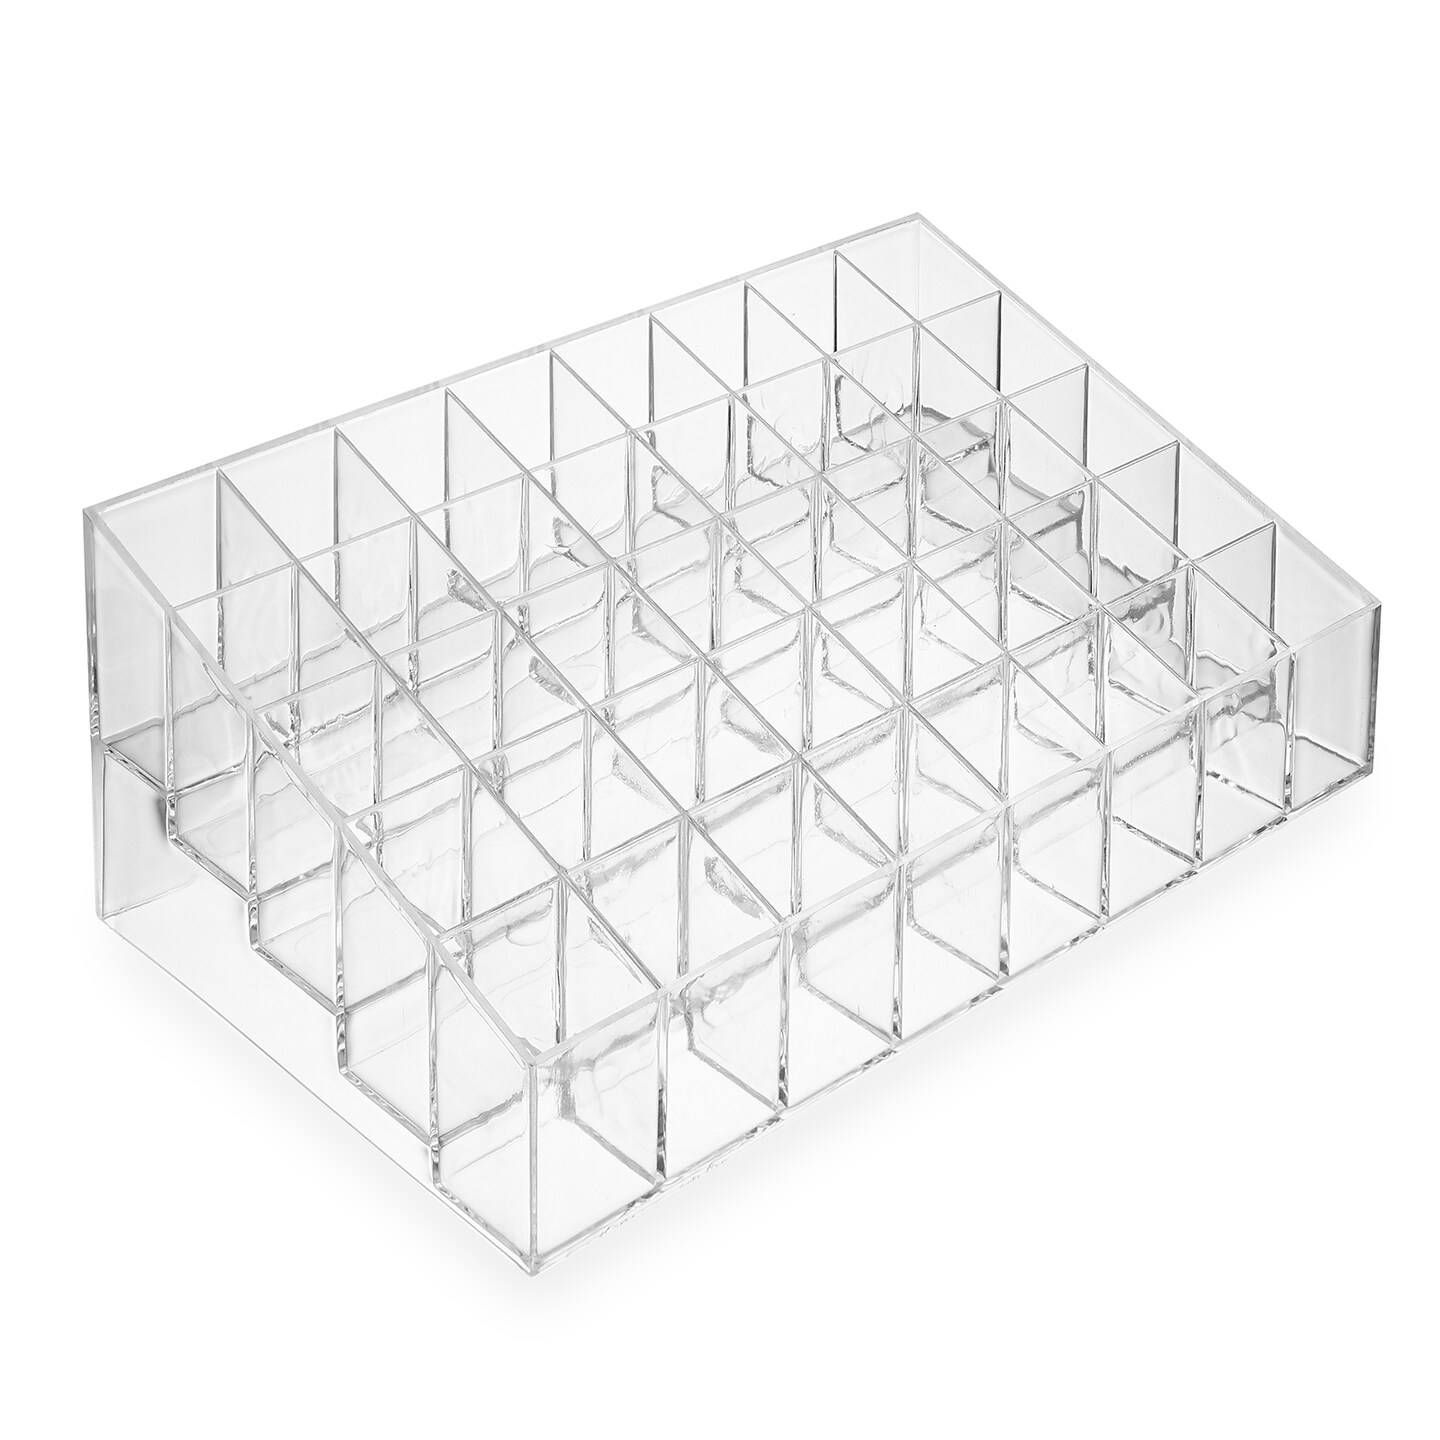 Casafield 40 Slot Acrylic Lipstick &#x26; Makeup Organizer - Cosmetic Display Case - Clear